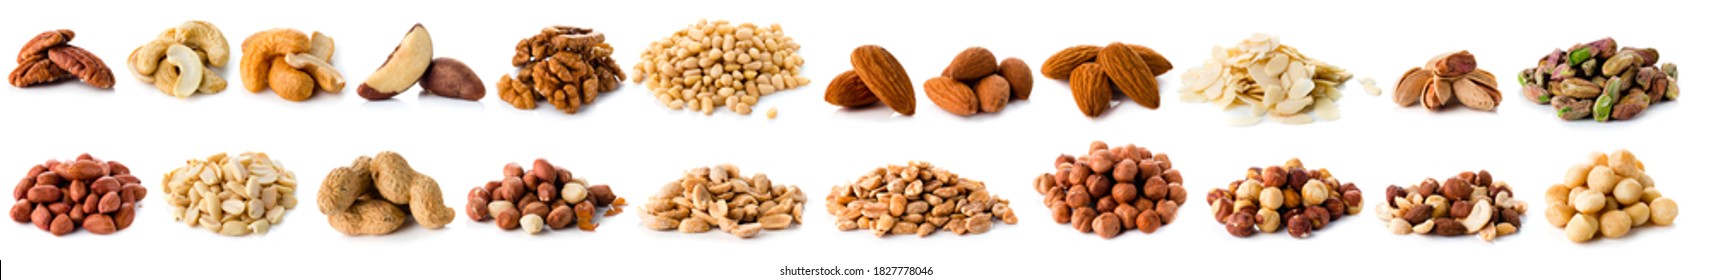 Set of Nuts Walnuts, Brazil Nut, Almond, cashew, Pine Nut peanuts, pistachios, pecans collection Isolated, Set of different delicious organic nuts on white background - Shutterstock ID 1827778046